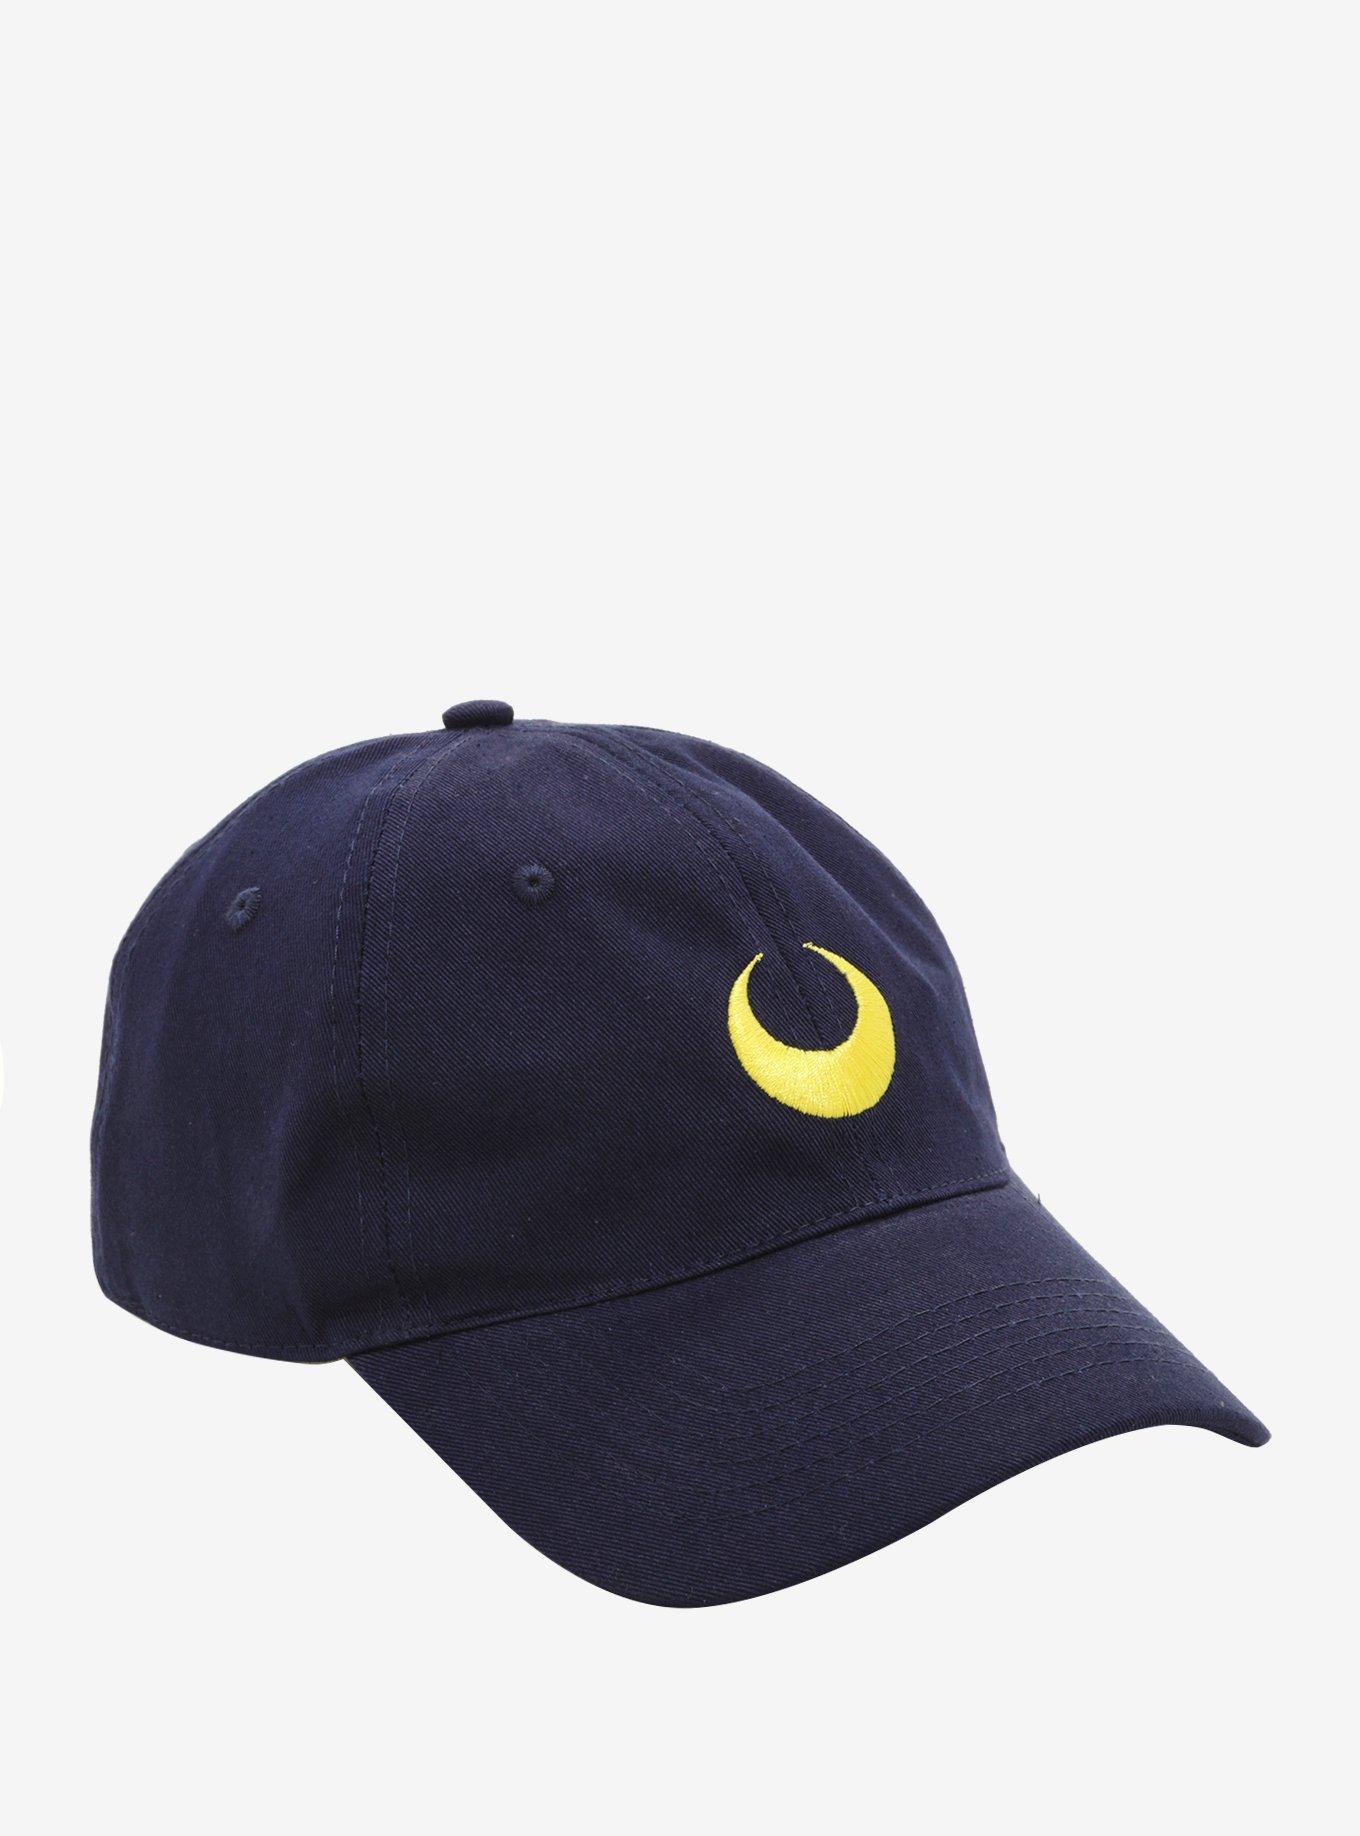 Baseball Cap Men Women Sailor Moon Crystal Unisex Classic Adjustable Dad Hat for Running Workouts and Outdoor Black